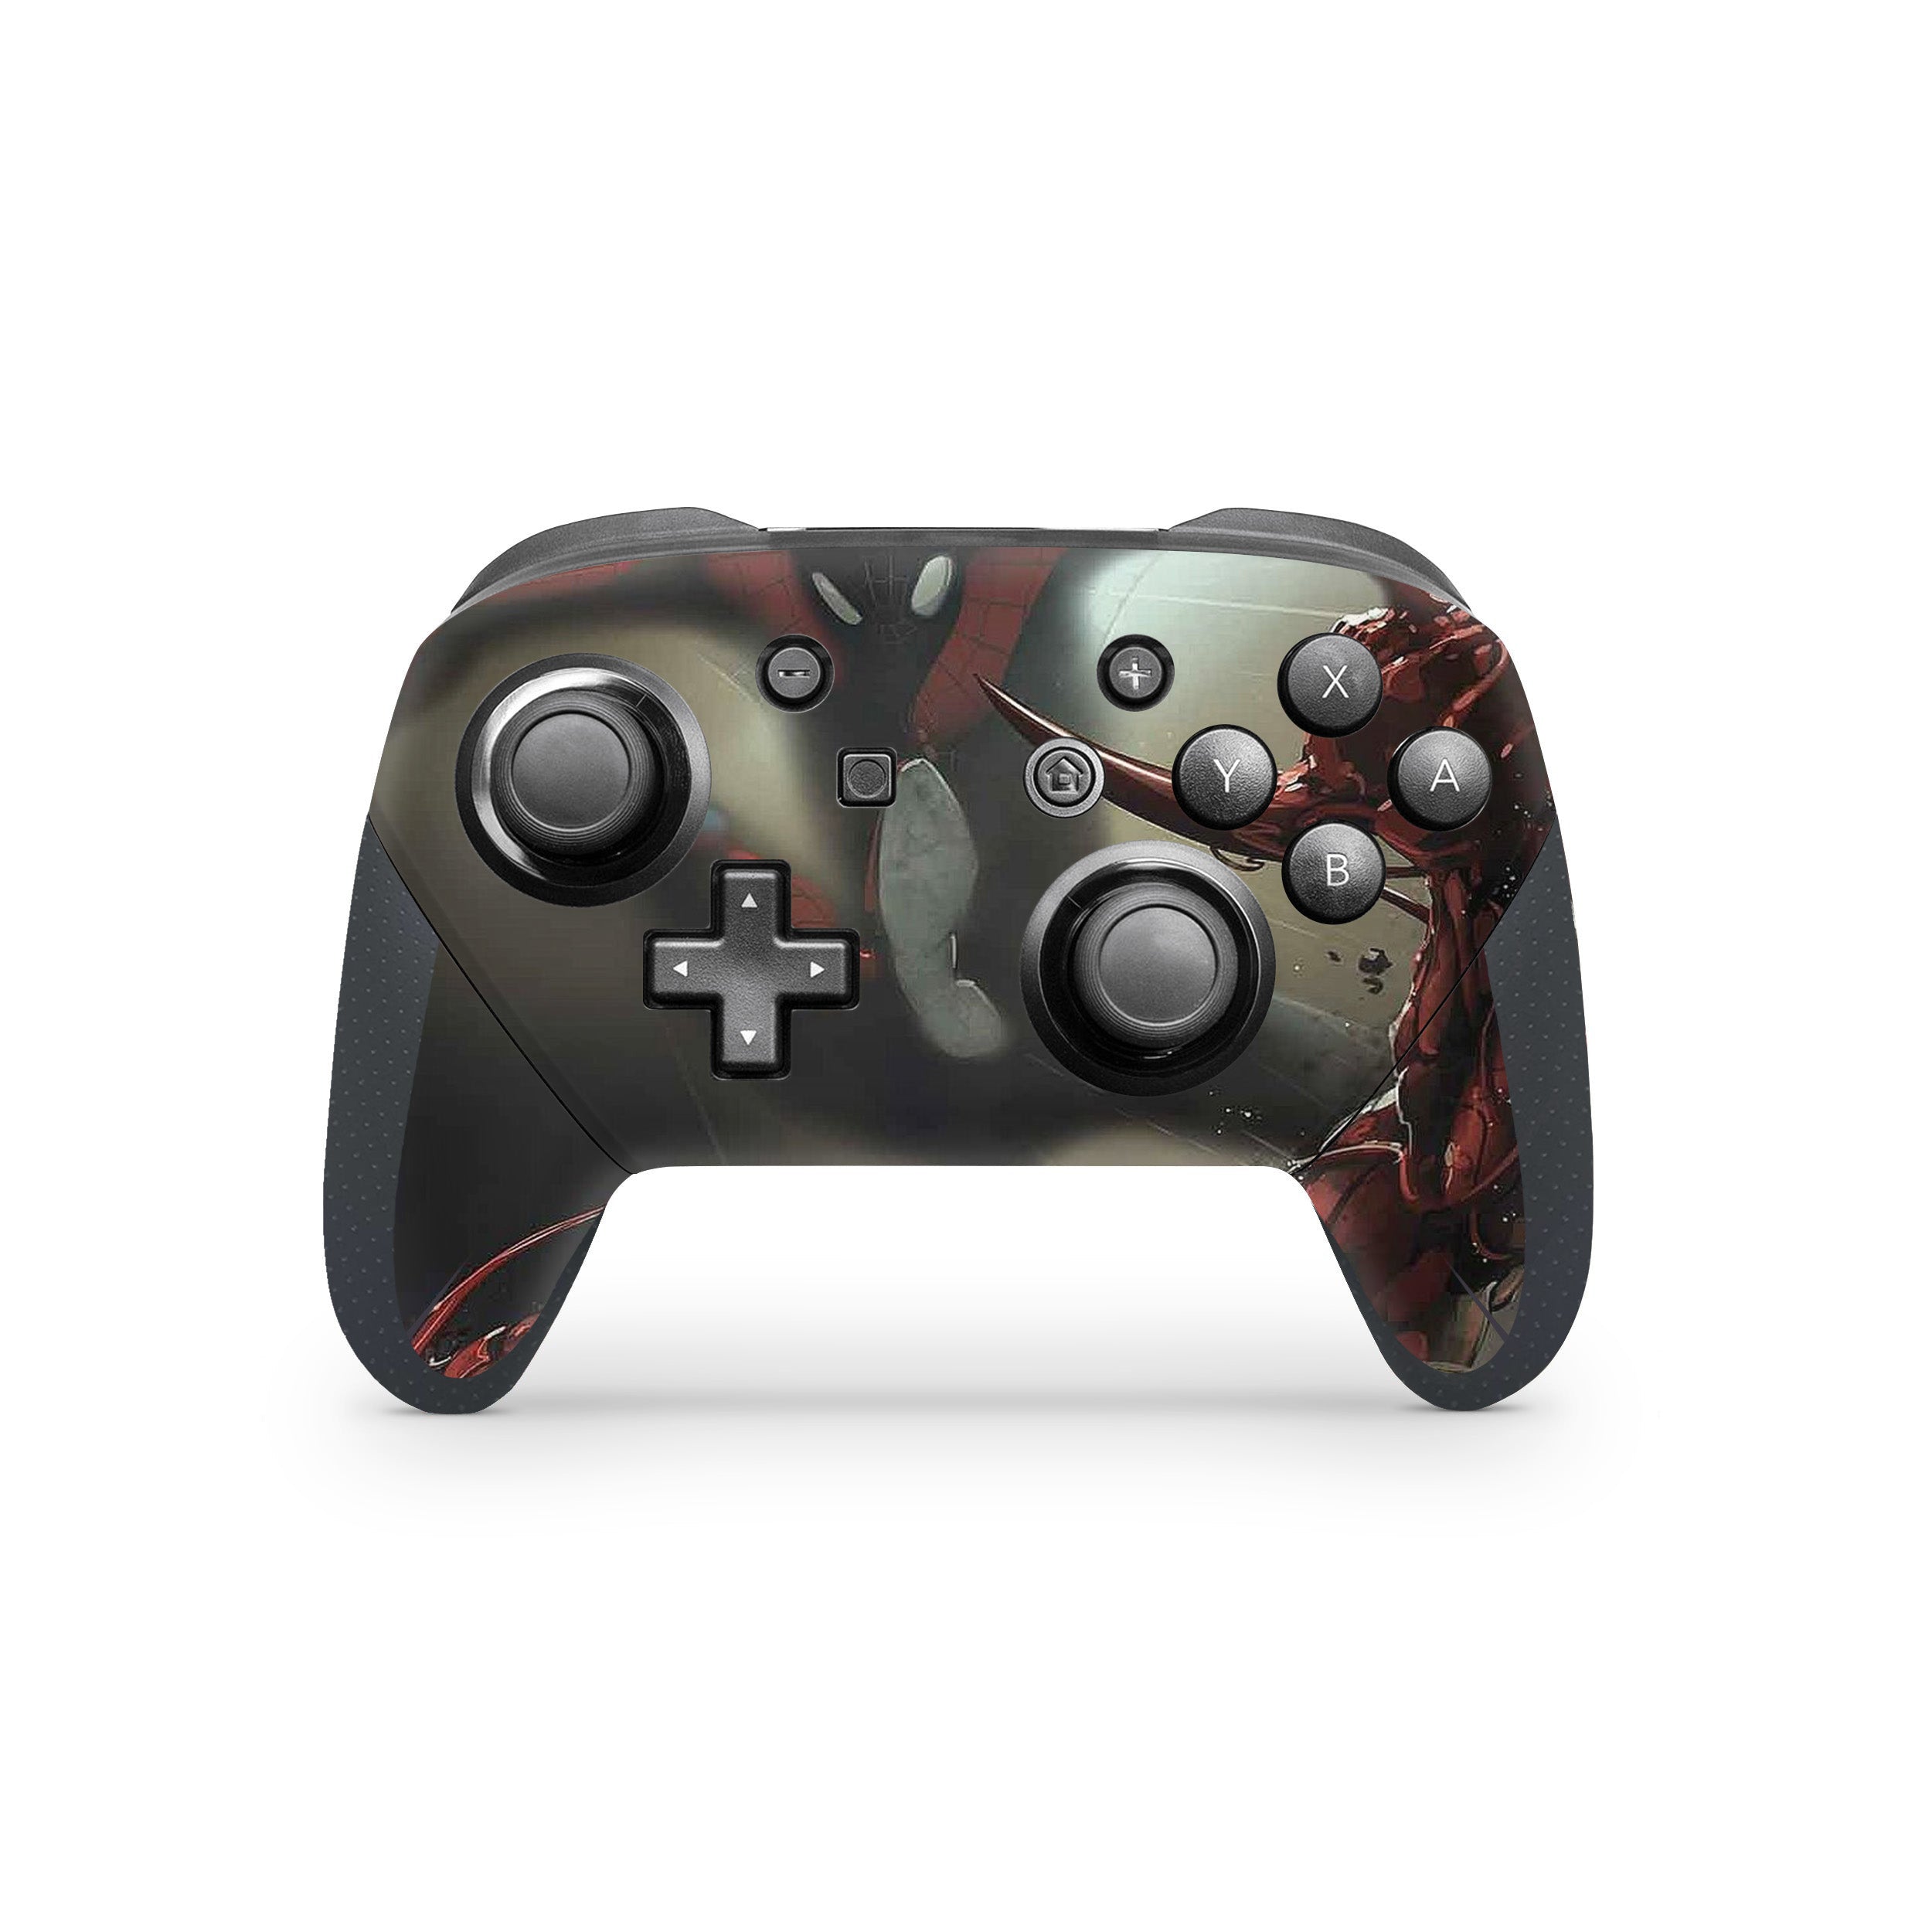 A video game skin featuring a Marvel Carnage design for the Switch Pro Controller.